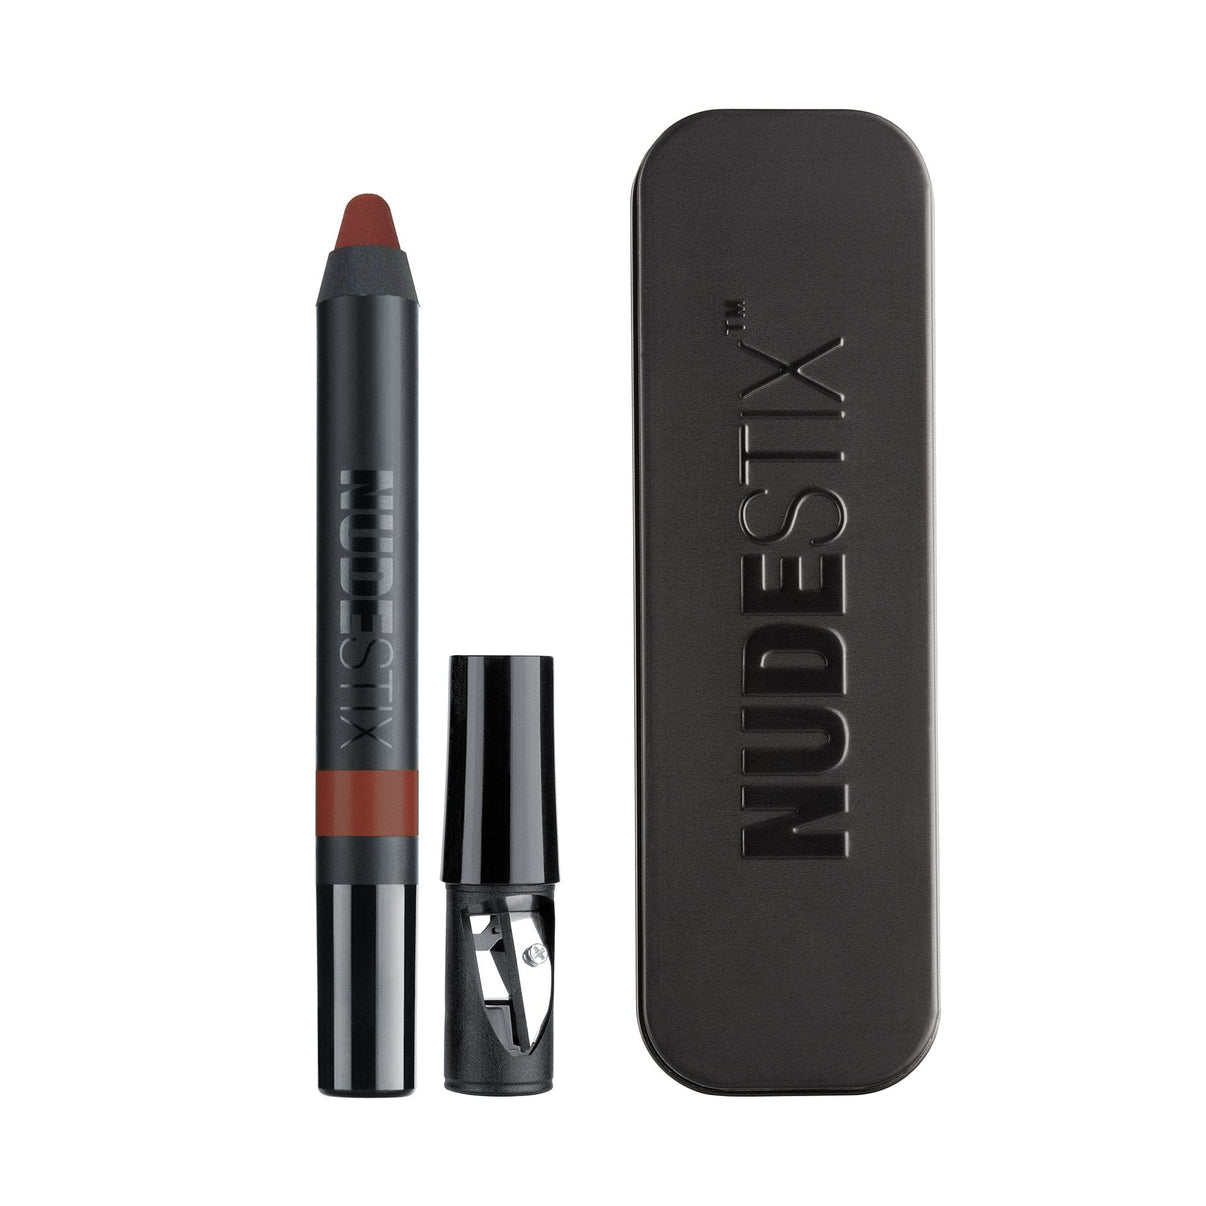 Intense Matte Lip + Cheek pencil in shade fringe with sharpener and nudestix can